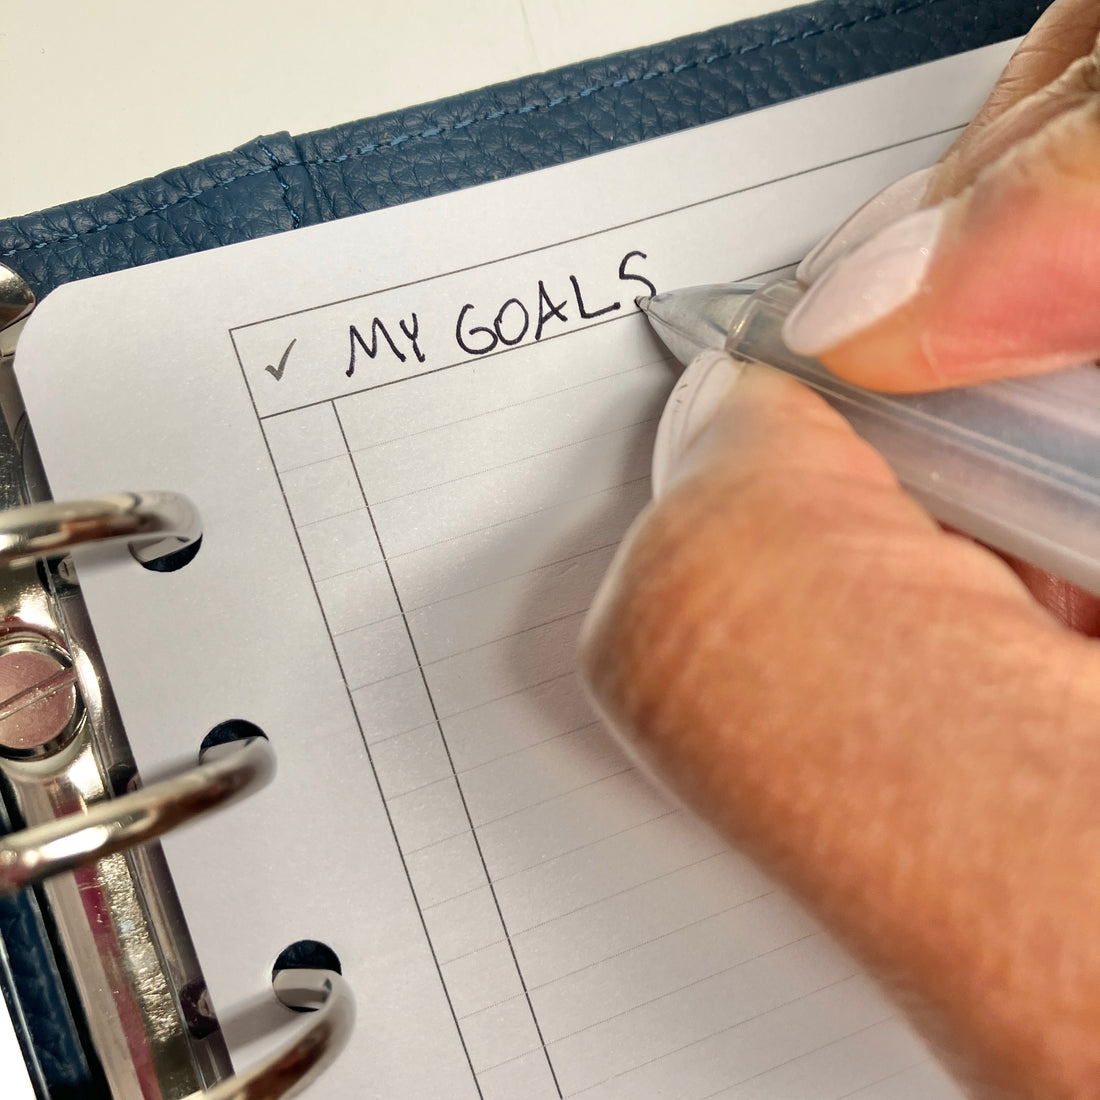 An Example of a SMART Goal